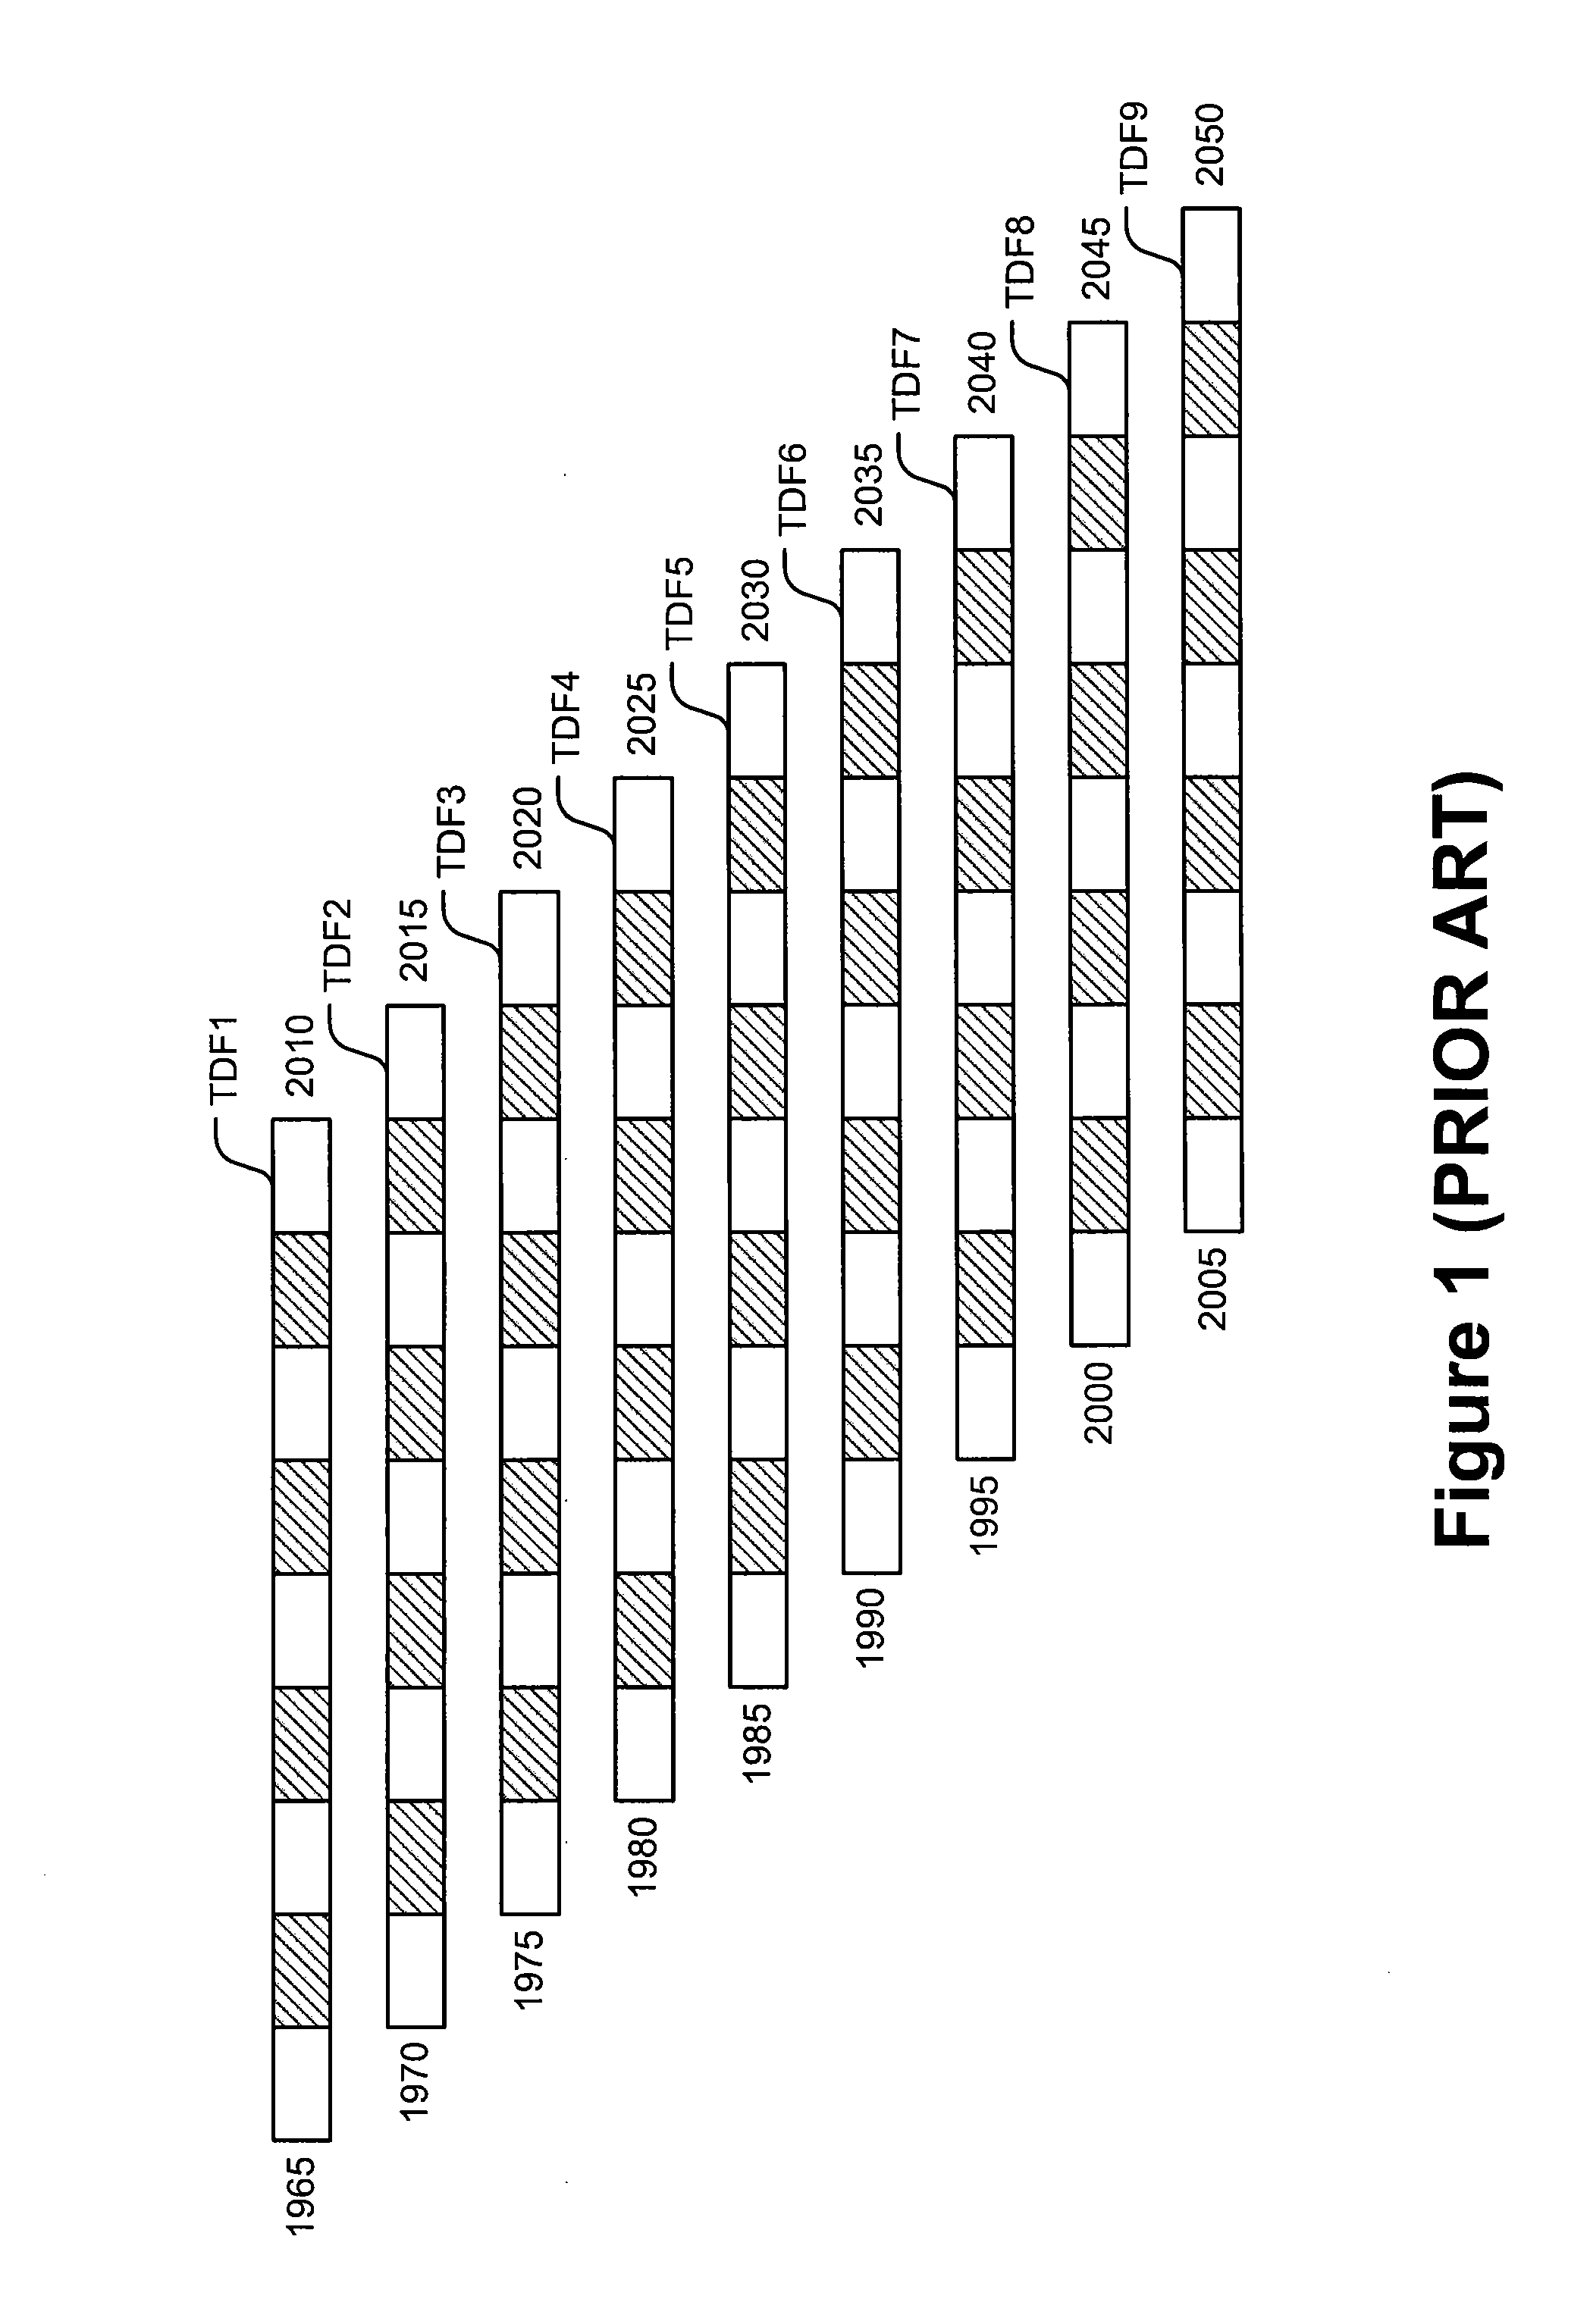 Method of evaluating the performance of a family of target date funds